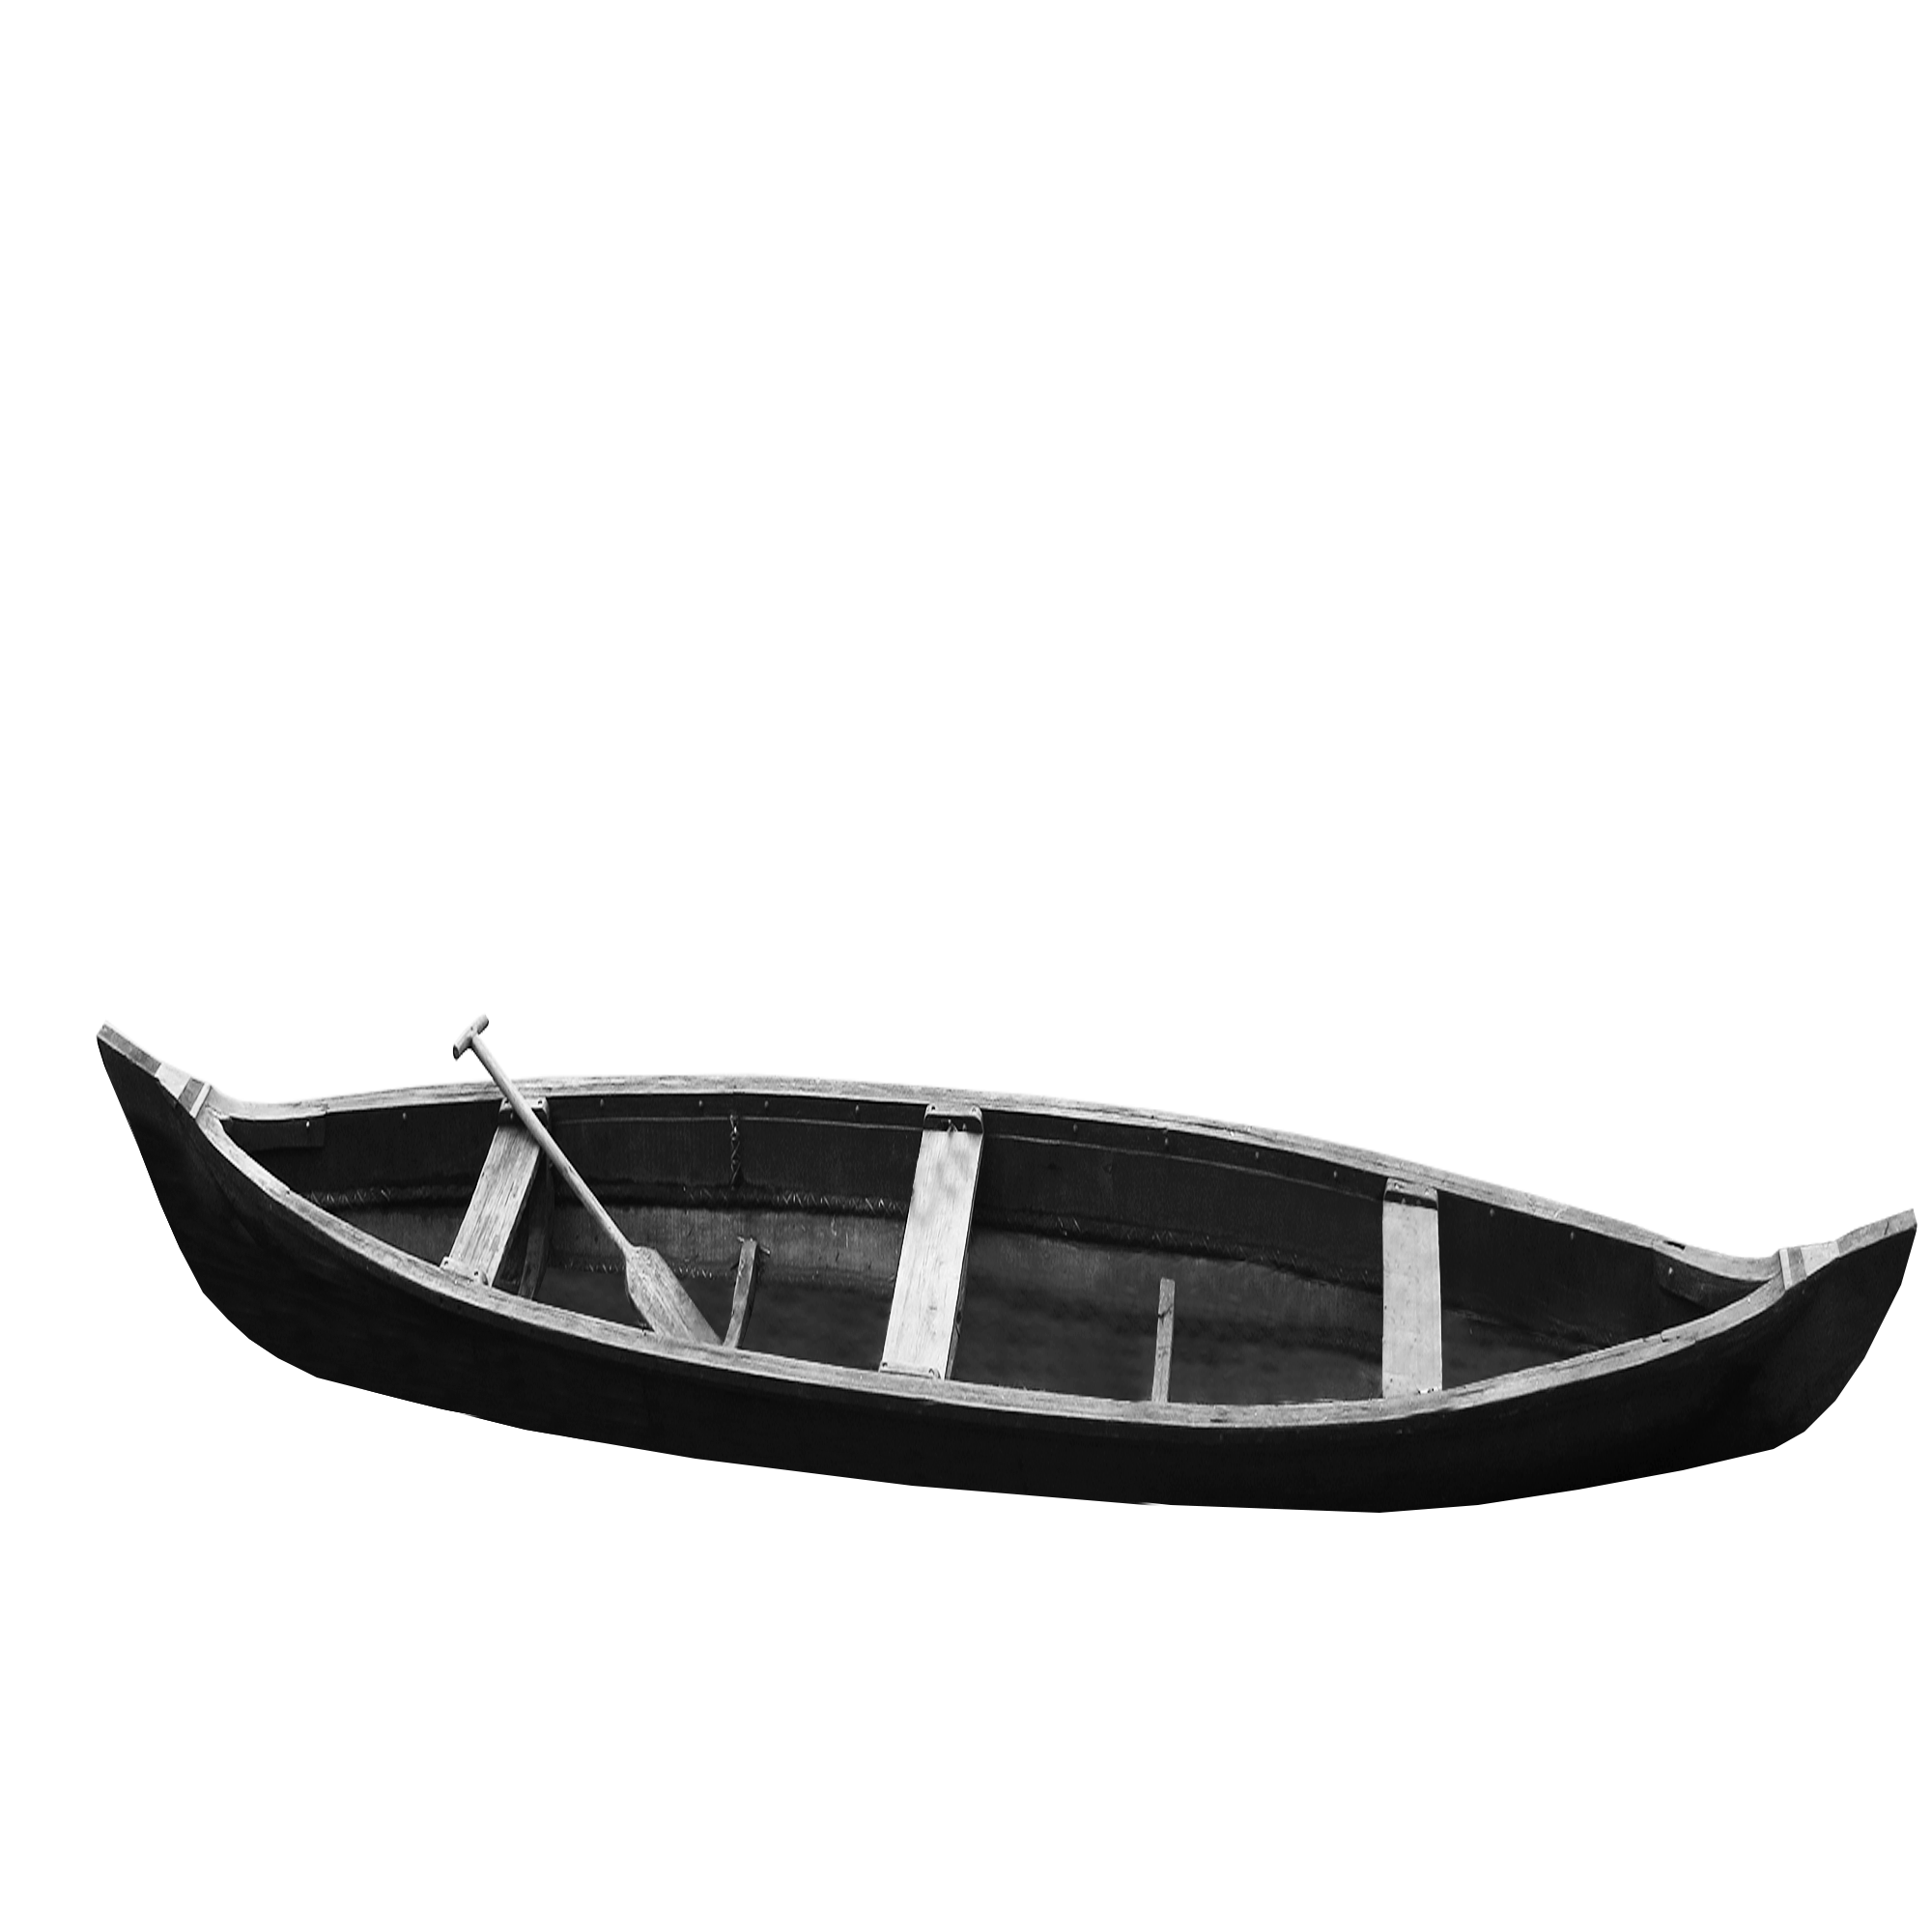 Wooden Boat Oasis outdoor decor | Nimton Sales and Distribution Pvt Ltd